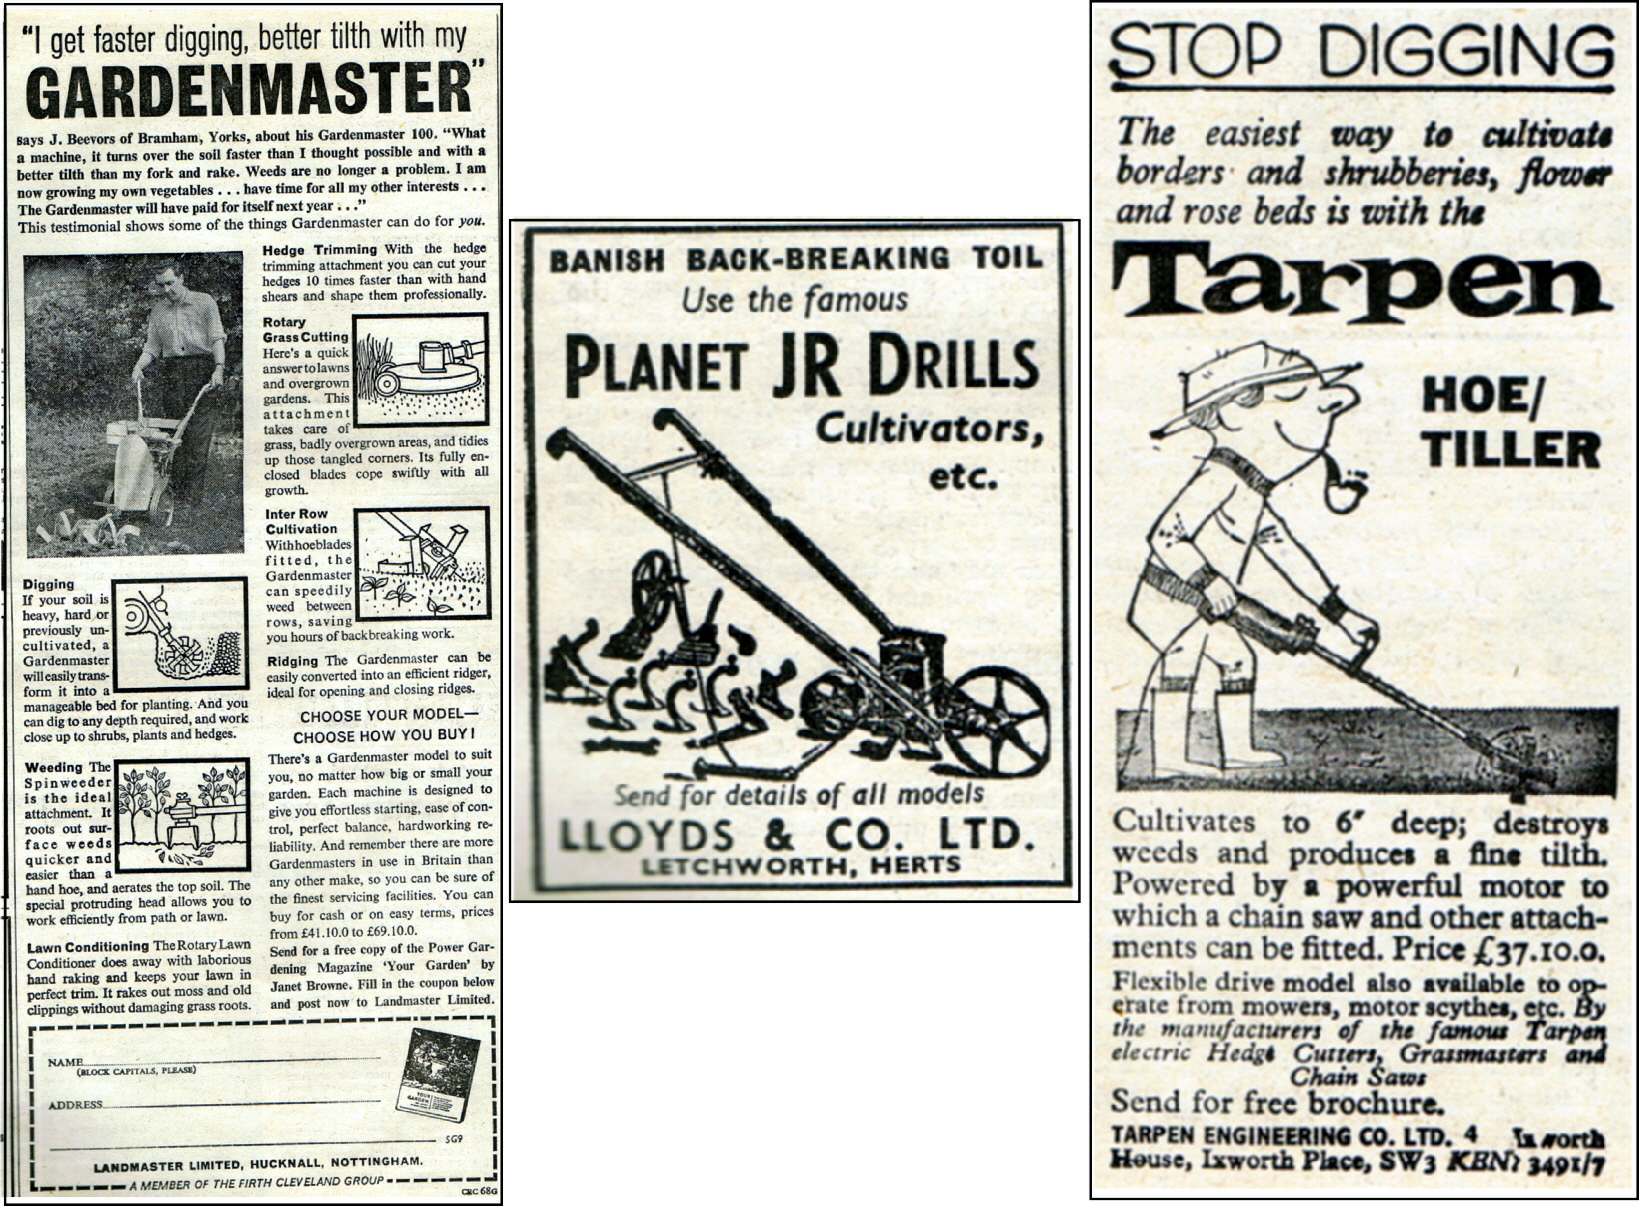 Gardenmaster Limited, Planet JR Drills and Tarpen Hoe in 1964